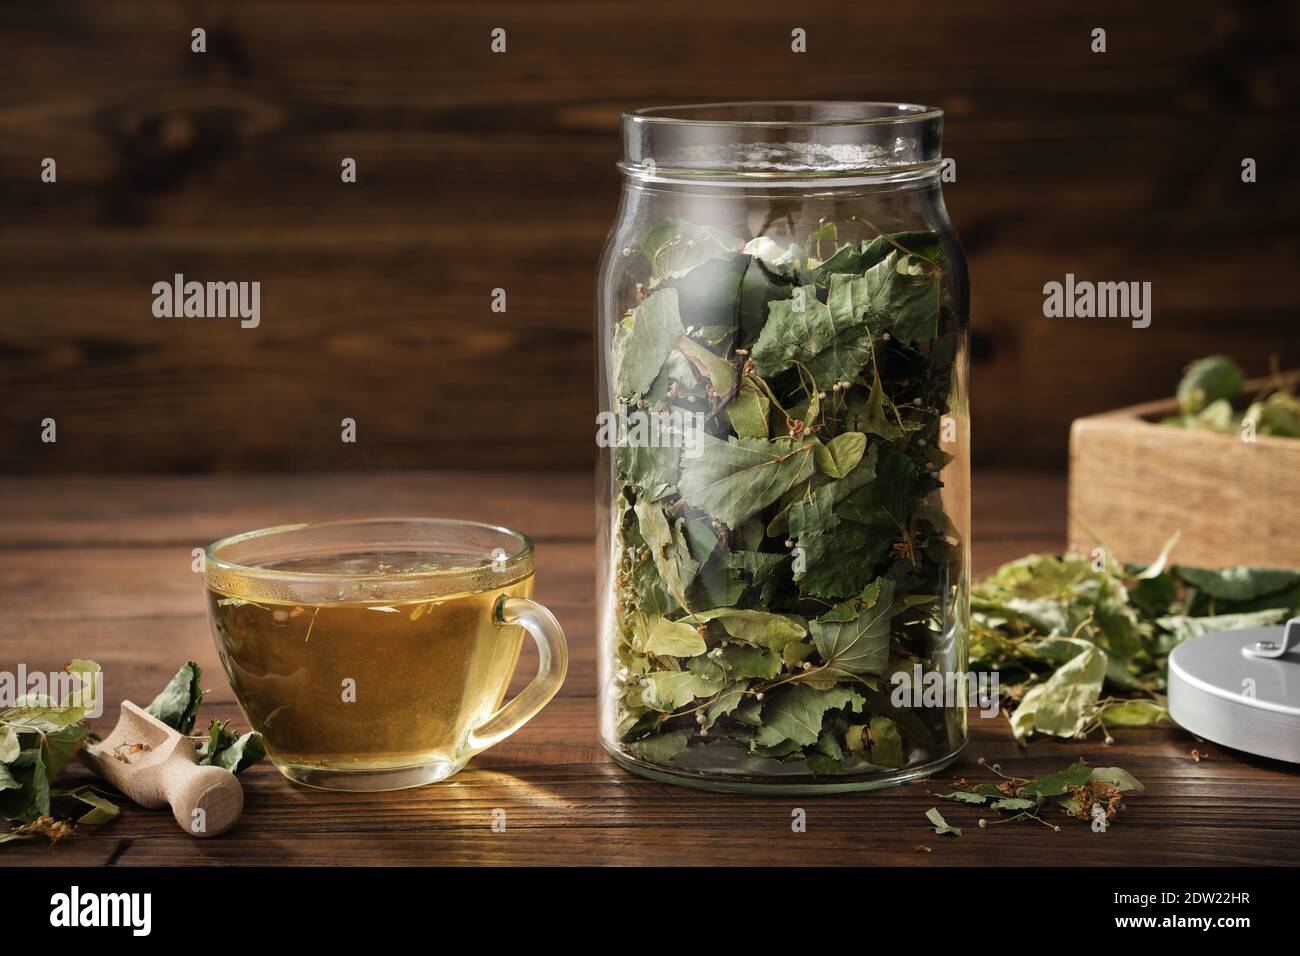 Cup of healthy tea with Linden tree flowers, jar of dry flowers and leaves of lime or Tilia cordata tree. Treatment for cold and flu. Stock Photo